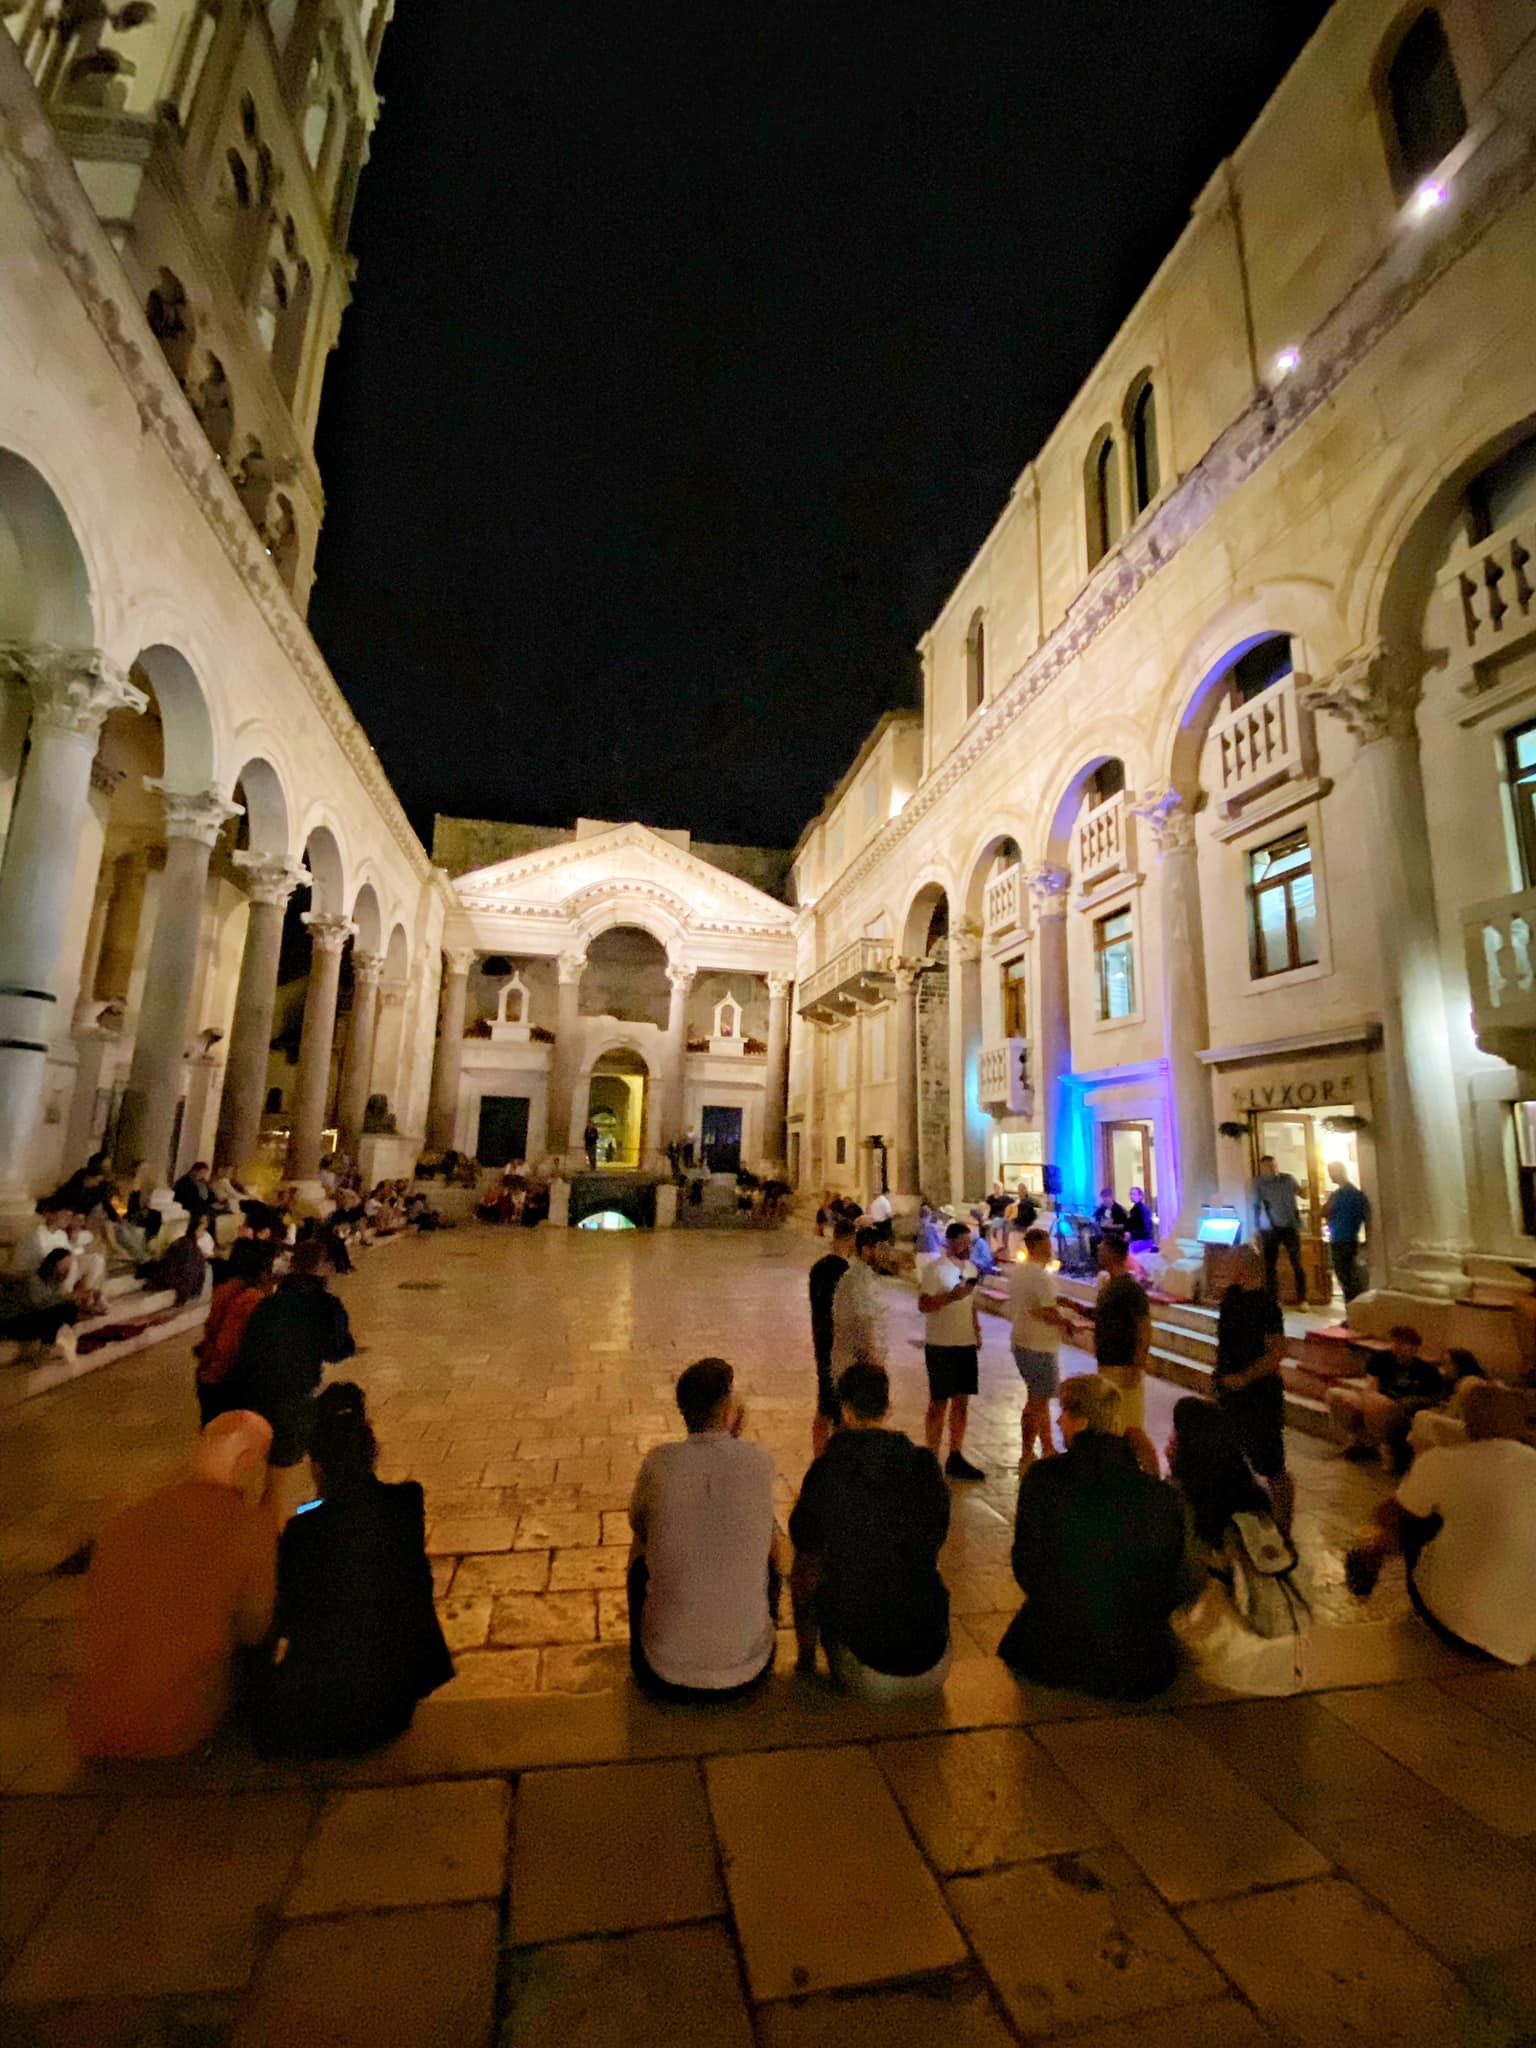  A little night music in the Peristyle, the central square within the Palace. 